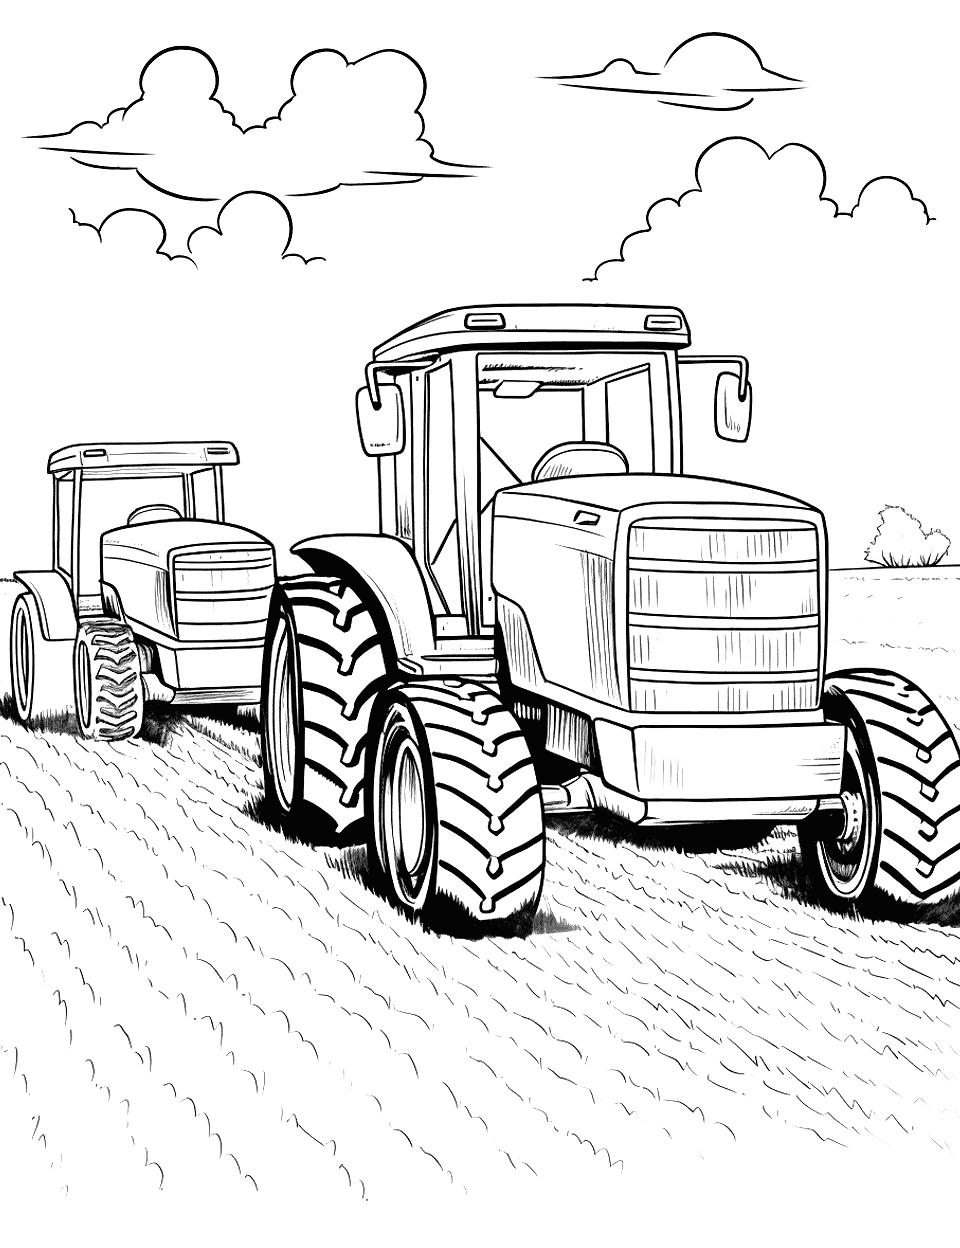 Tractor Showdown Coloring Page - A scene featuring two tractors goin in same direction as if racing.